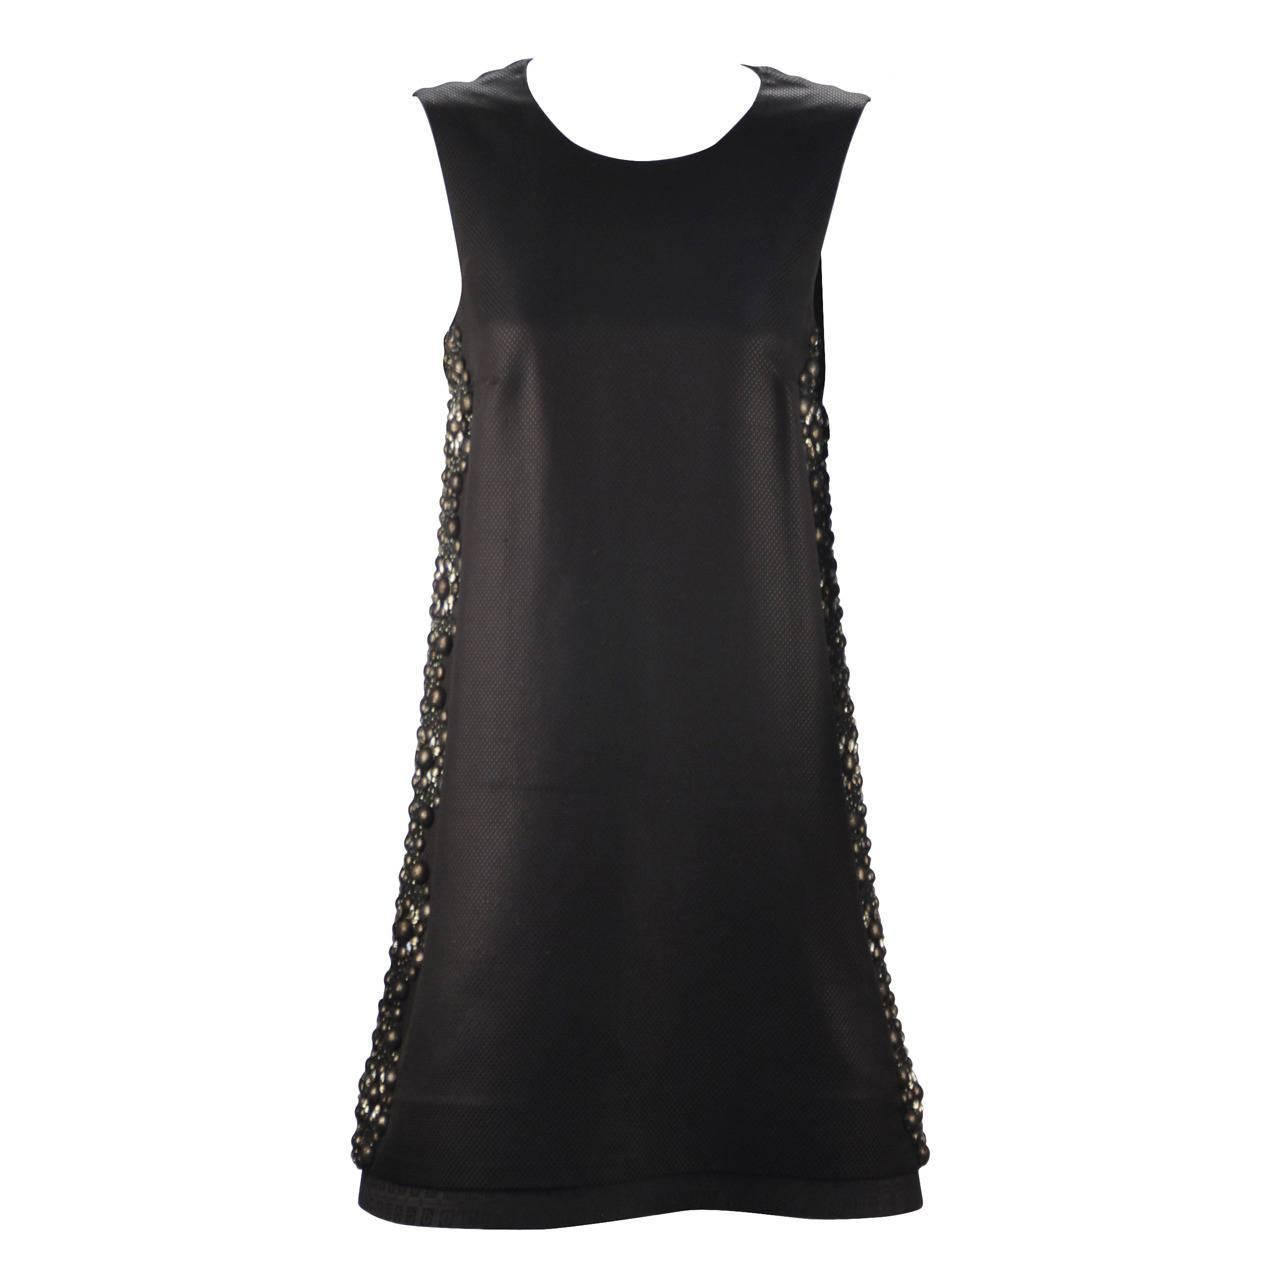 This A-Line black beauty is strikingly edgy - a Gucci masterpiece. The embellishments along the sides add glamour and interest. At the same time adding class and sophistication. Diamond crystals sparkle and round beads are covered with black tulle